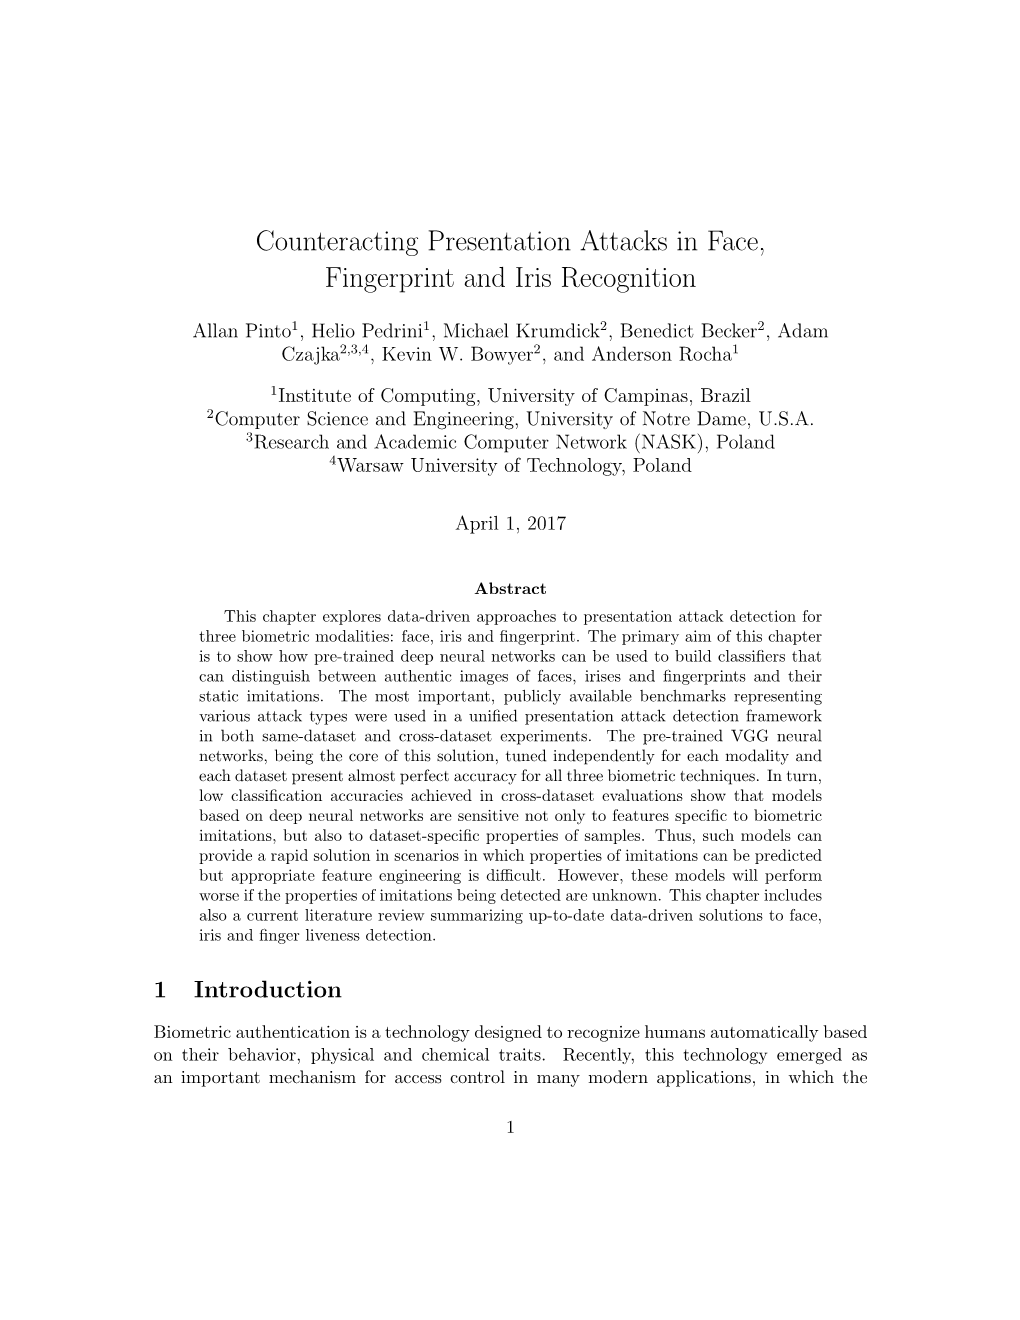 Counteracting Presentation Attacks in Face, Fingerprint and Iris Recognition